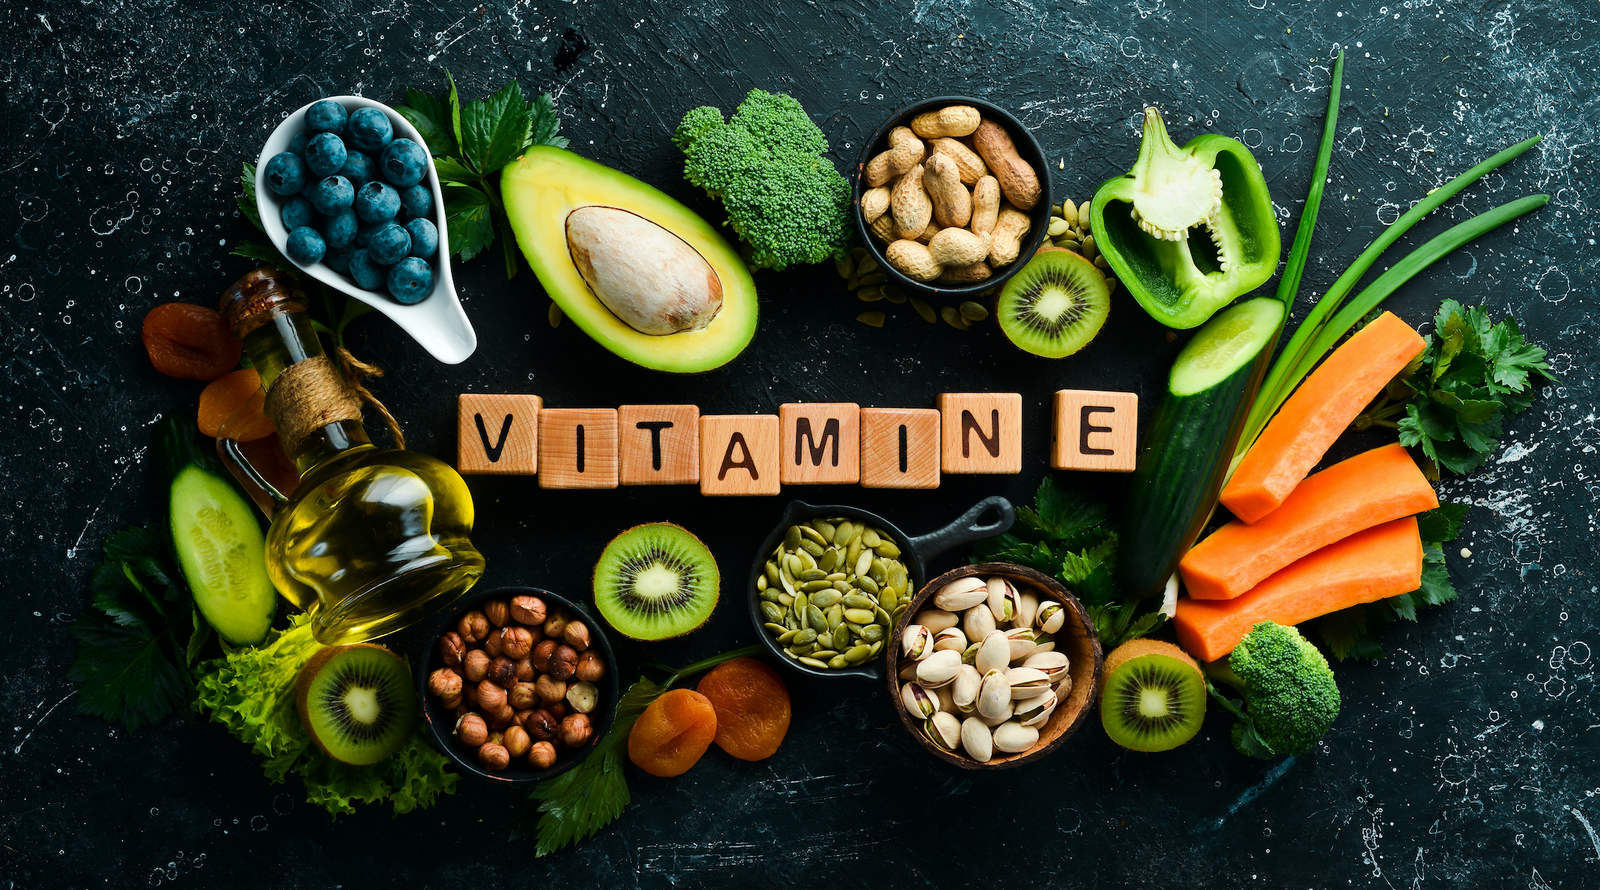 Flower Power Hour: The ABC’s of Vitamin E - A special report from the front line defense in preventing infection.